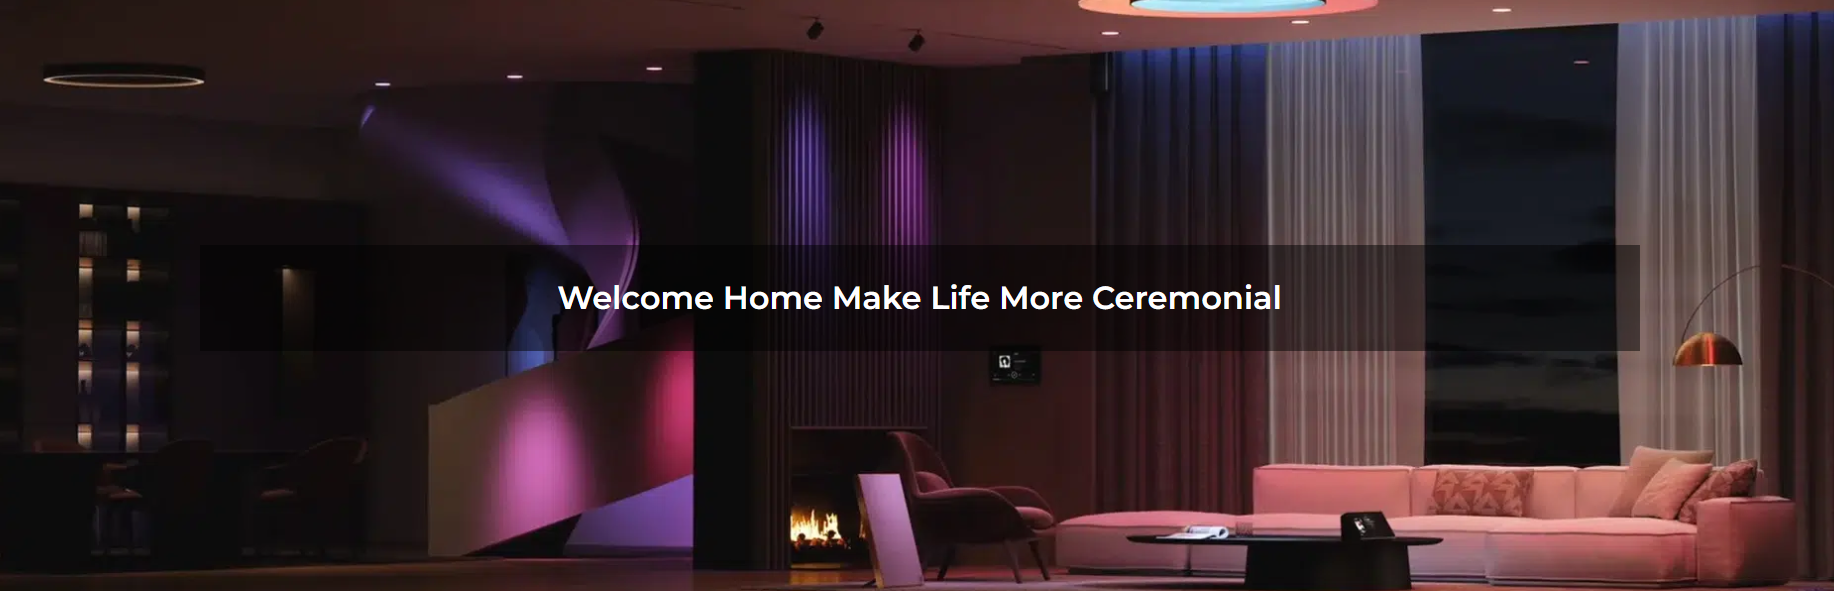 Welcome Home Make Life More Ceremonial